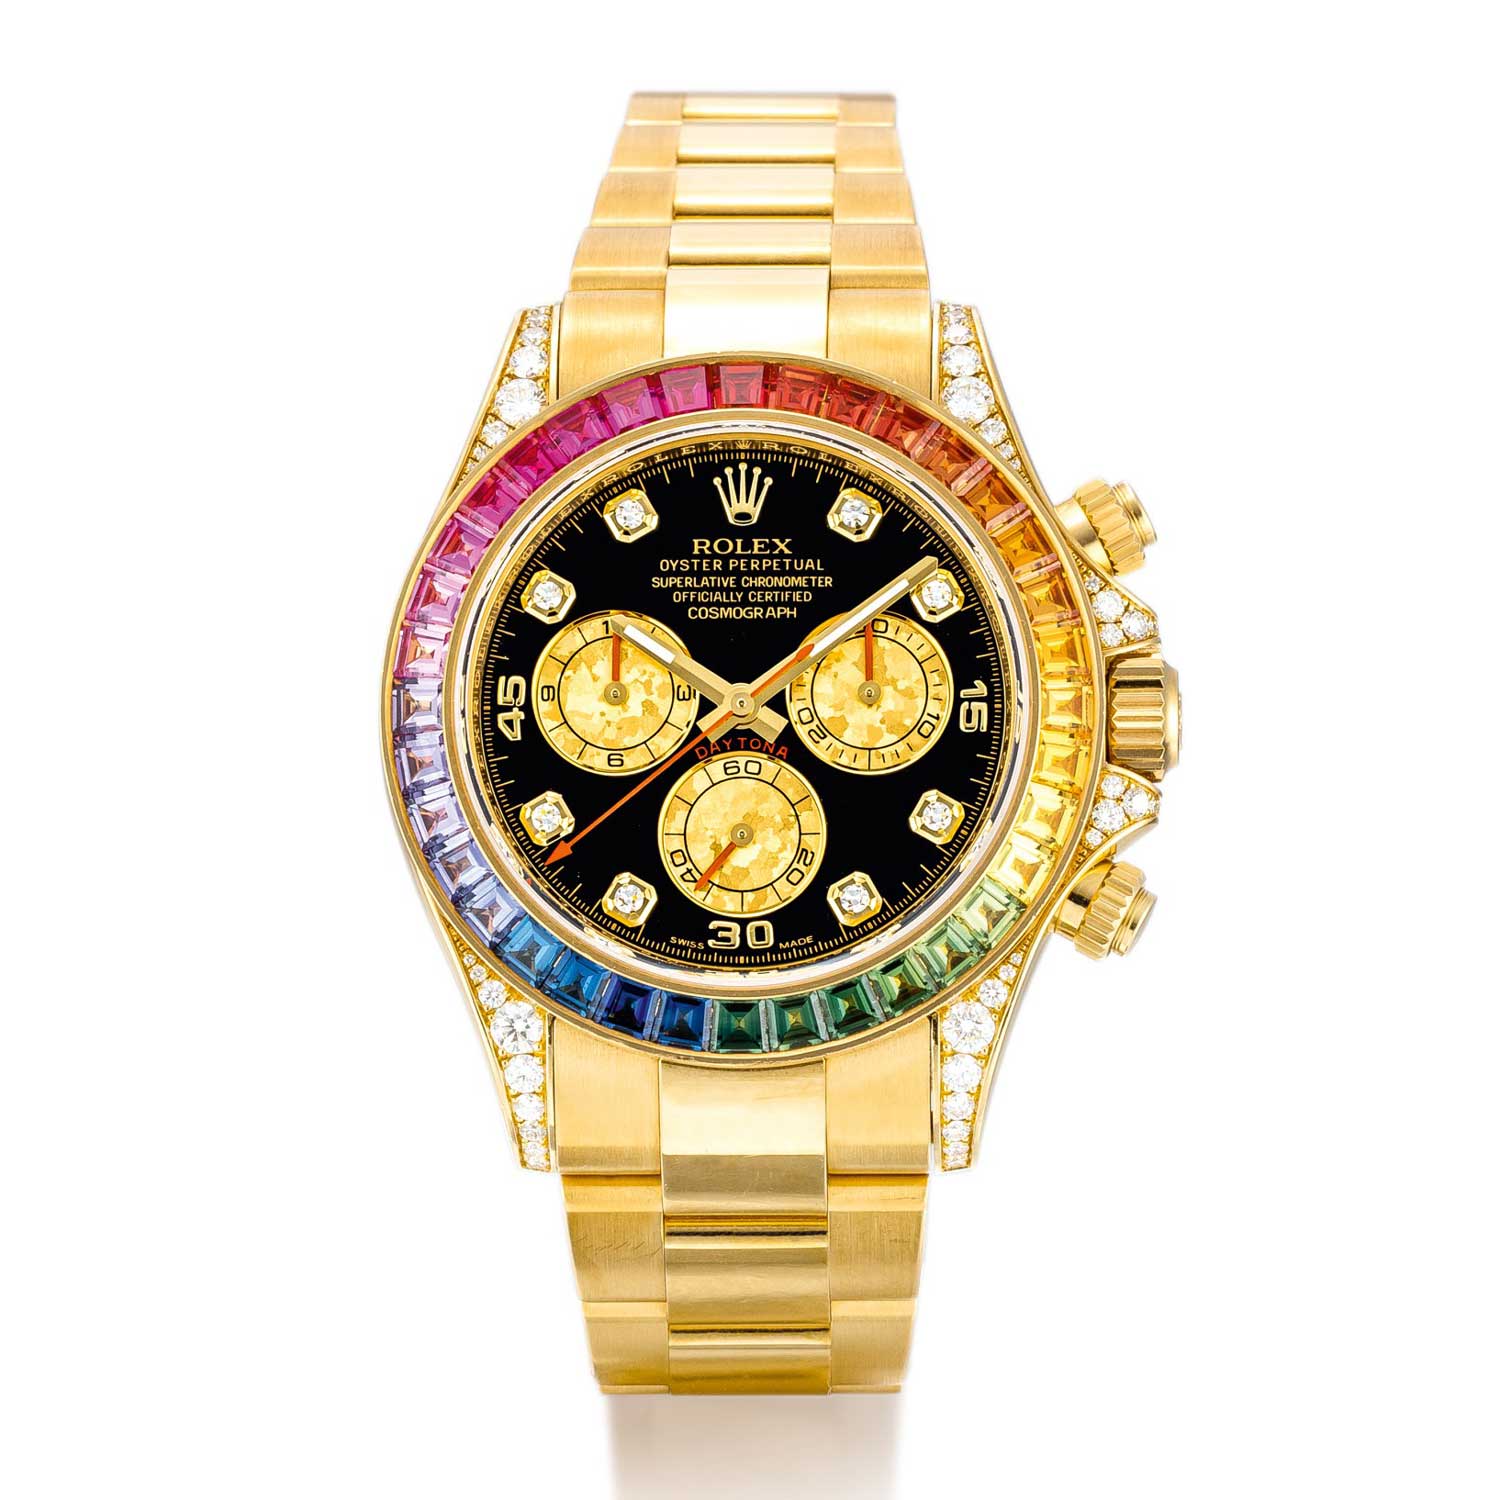 Yellow gold Rainbow Daytona reference 116598 RBOW (Image: Sotheby's)